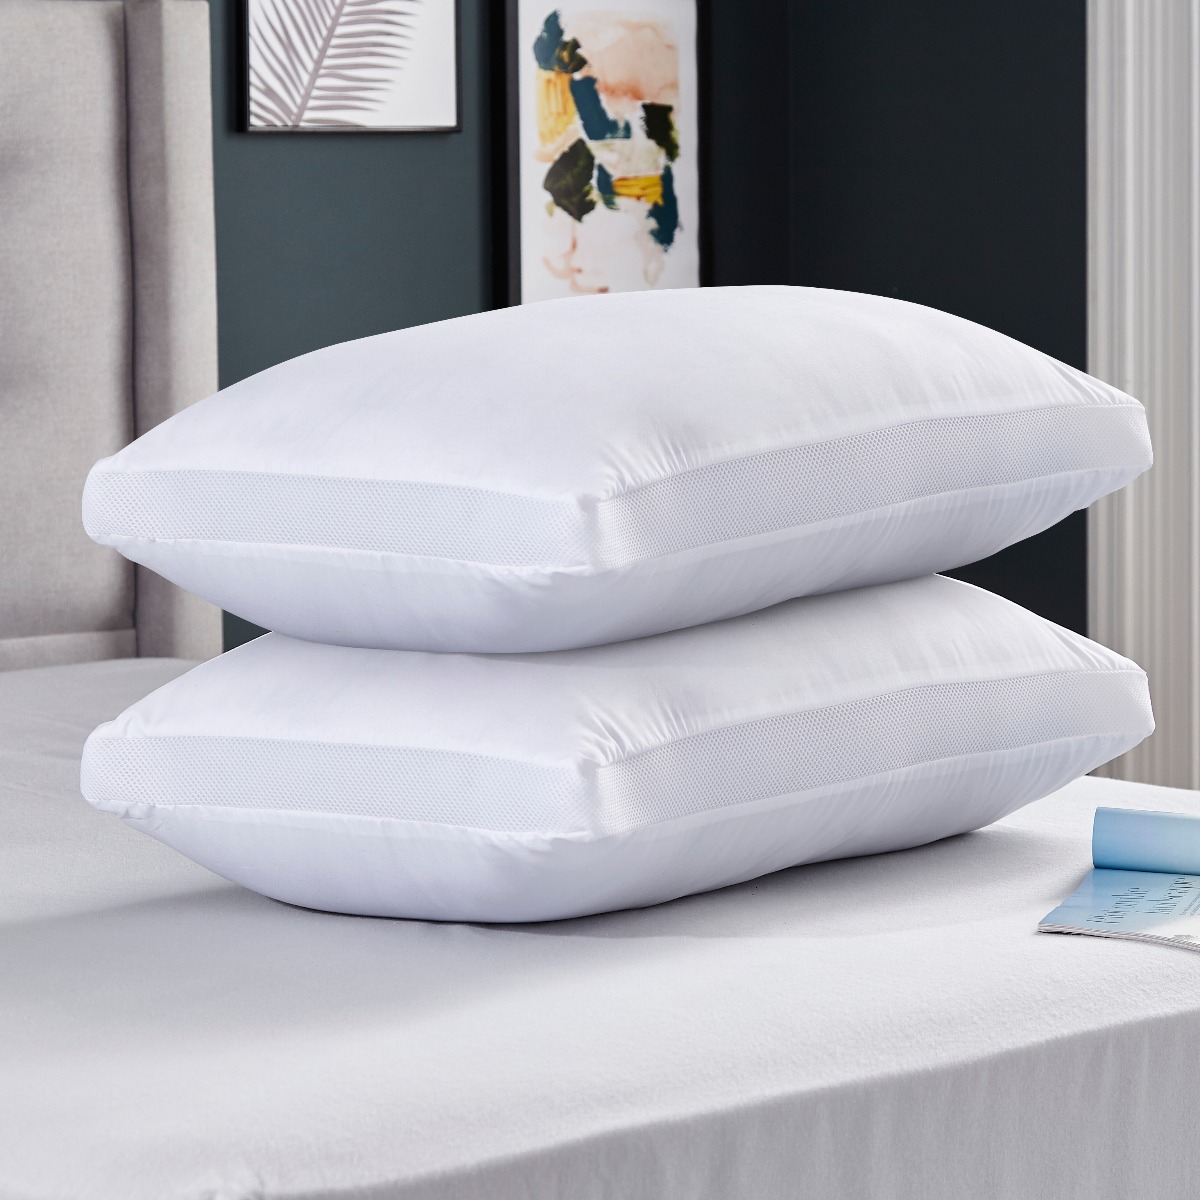 Hotel Collection Silentnight Hotel Collection Pillows Luxury Piped Bed 4 Four Pack Quality Soft 